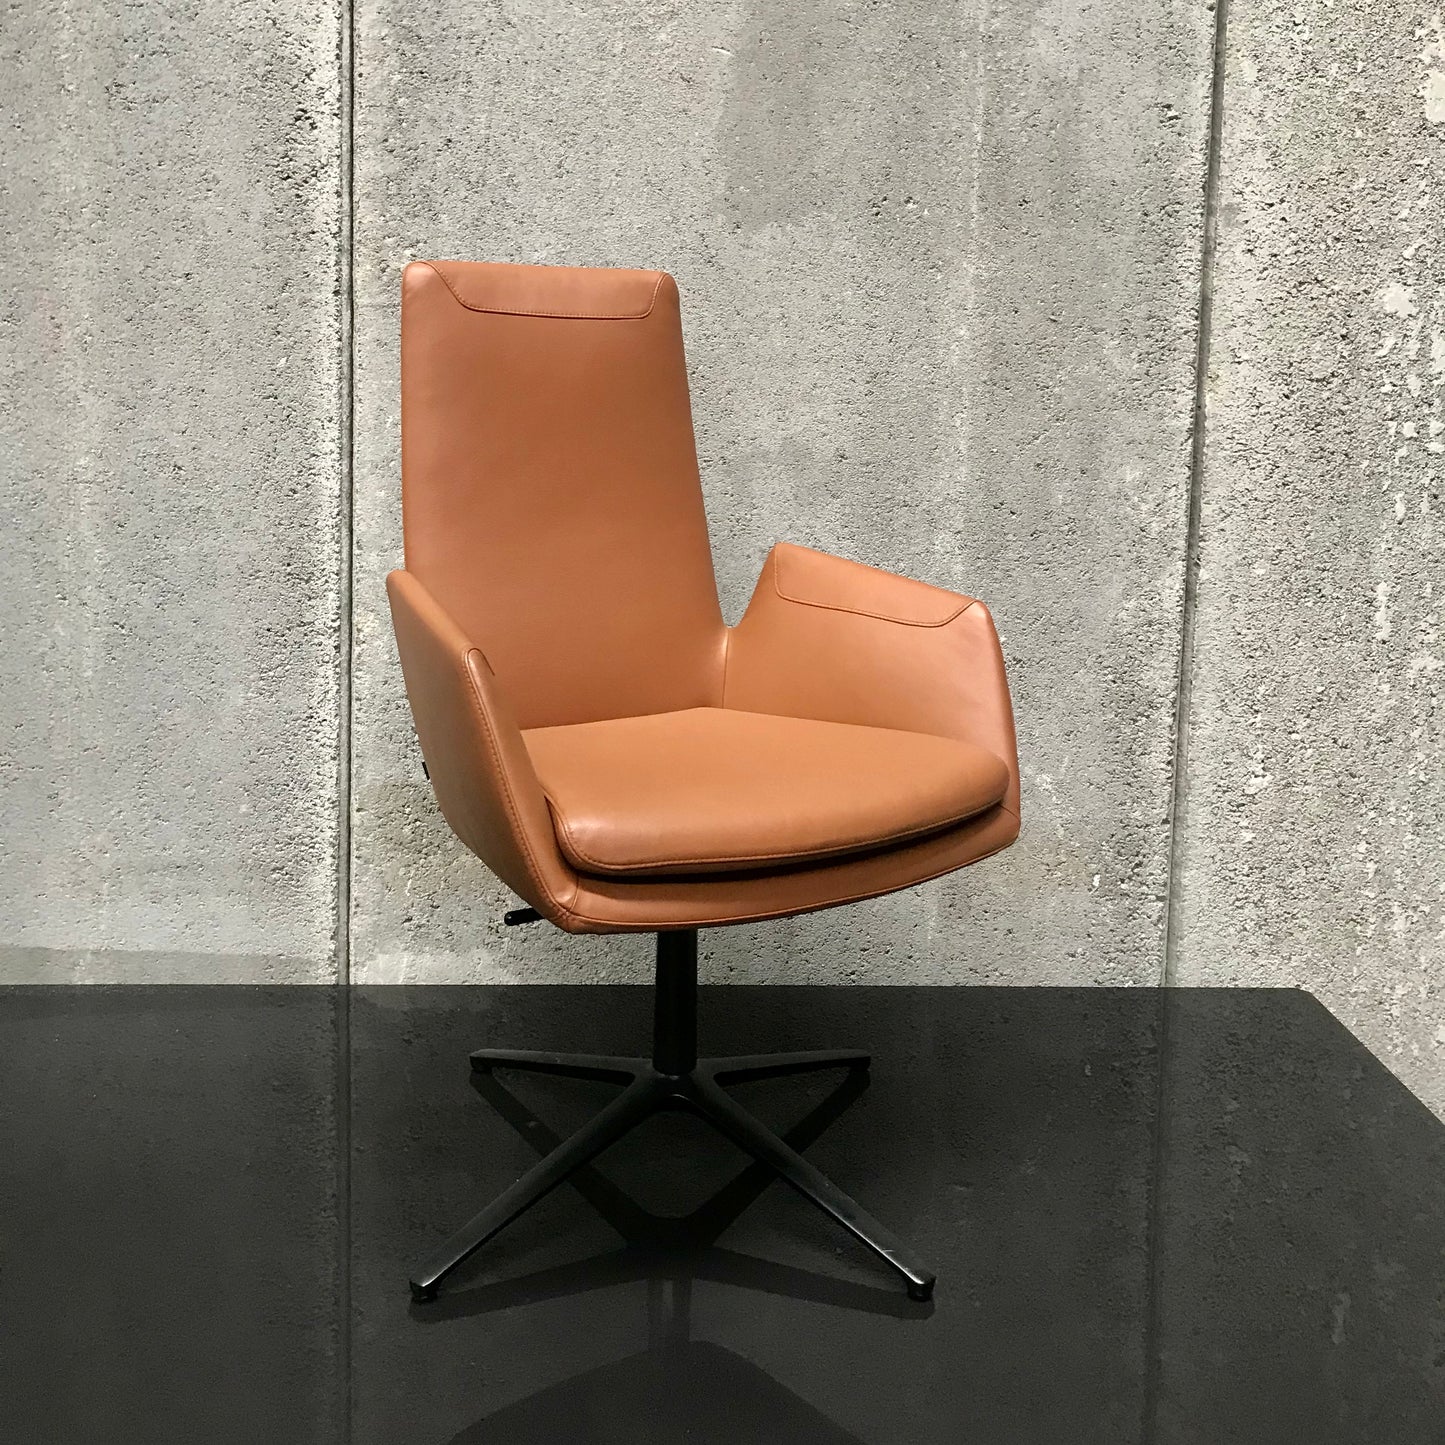 Cordia Chair by Jehs Laub for COR (2 available)